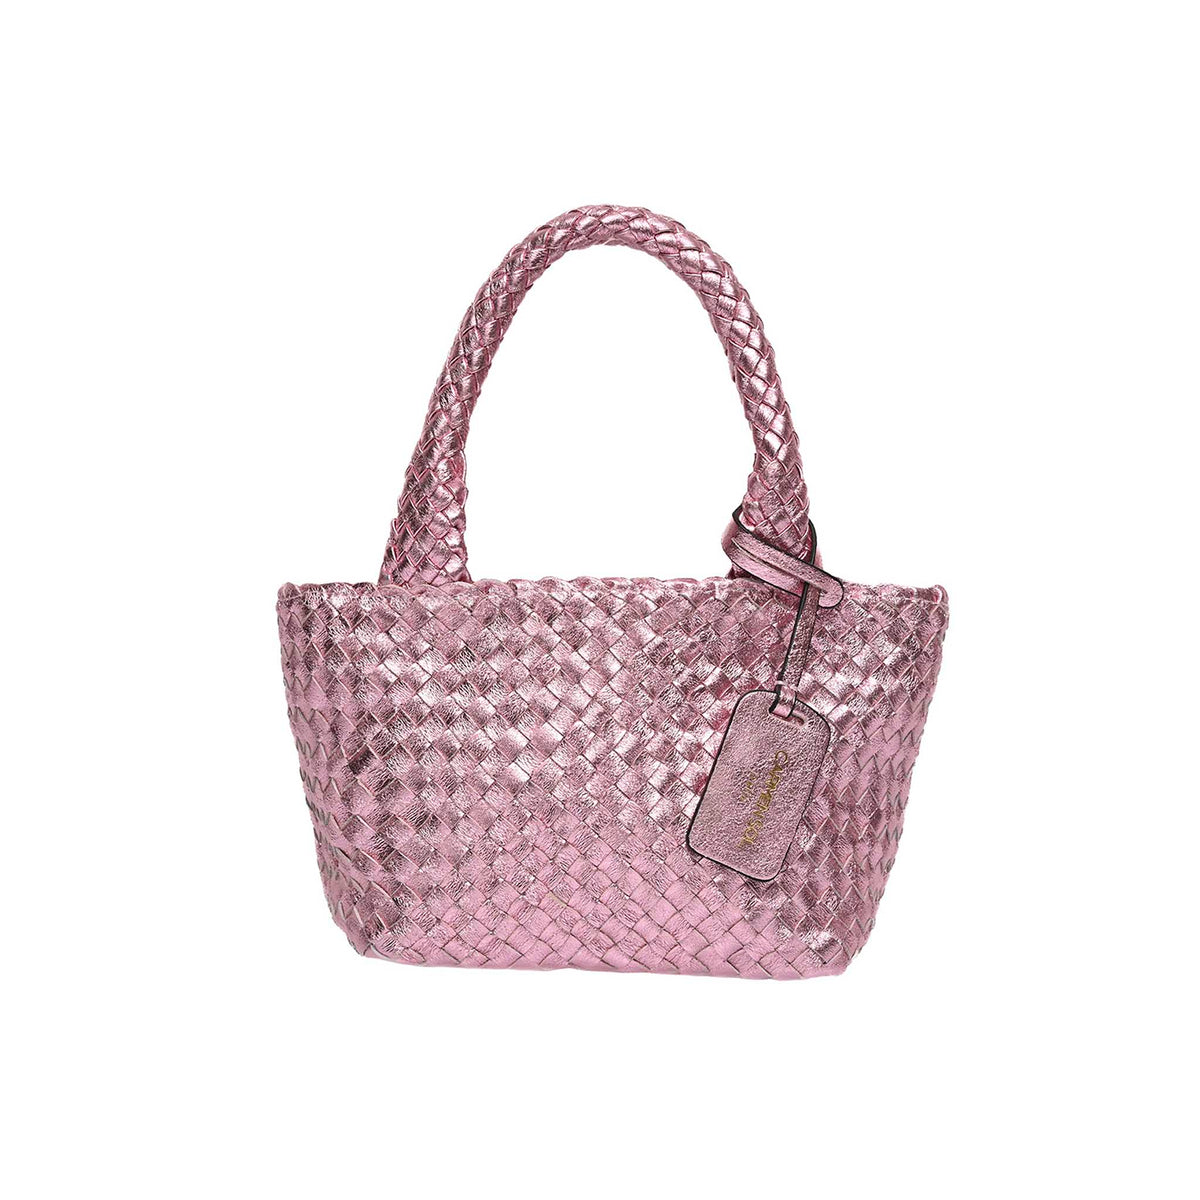 Pink metallic mini tote bag attract girls who love shopping, made in Italy from mini Carmen Sol